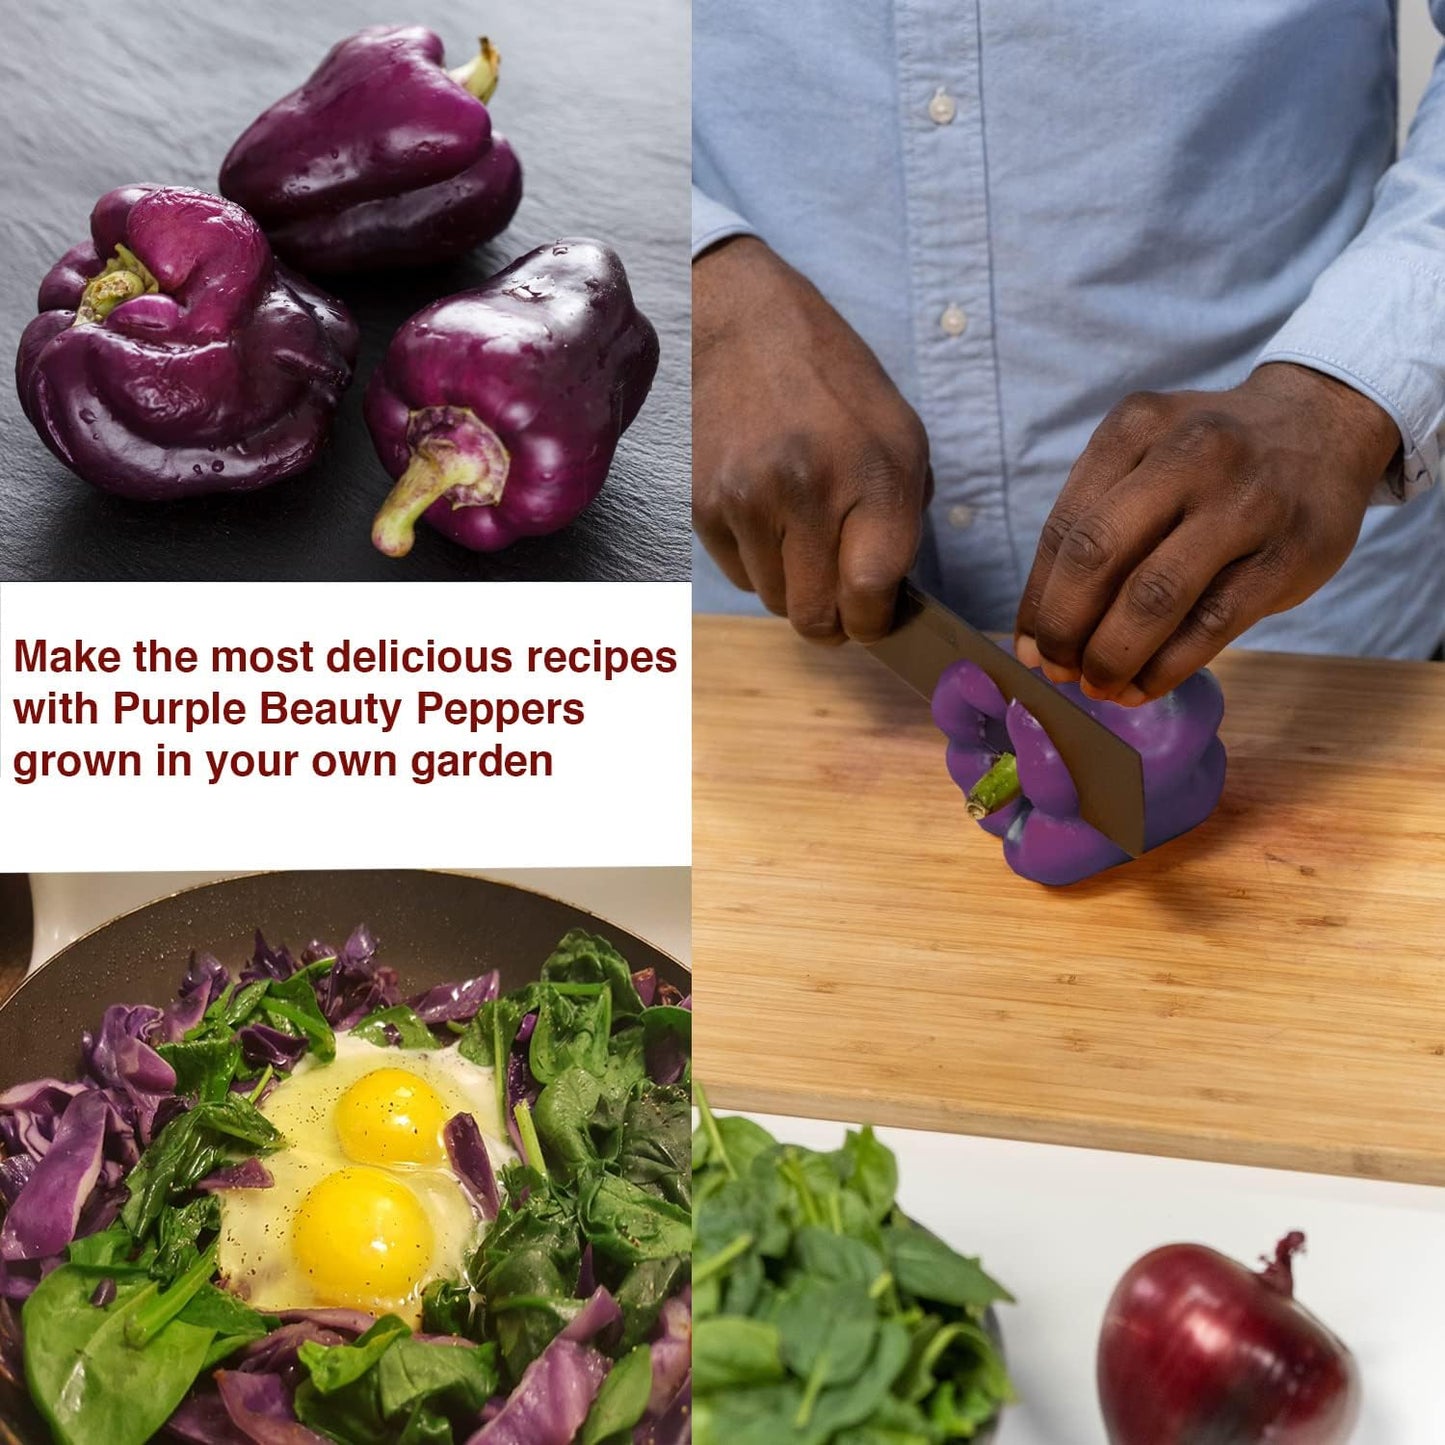 Purple Beauty Bell Pepper Seeds - Open Pollinated/Non-GMO Heirloom Seeds for Planting Outdoors/Indoors - Pack of 30 Sweet Pepper Seeds w/High Germination Rate - Growing Instructions Included